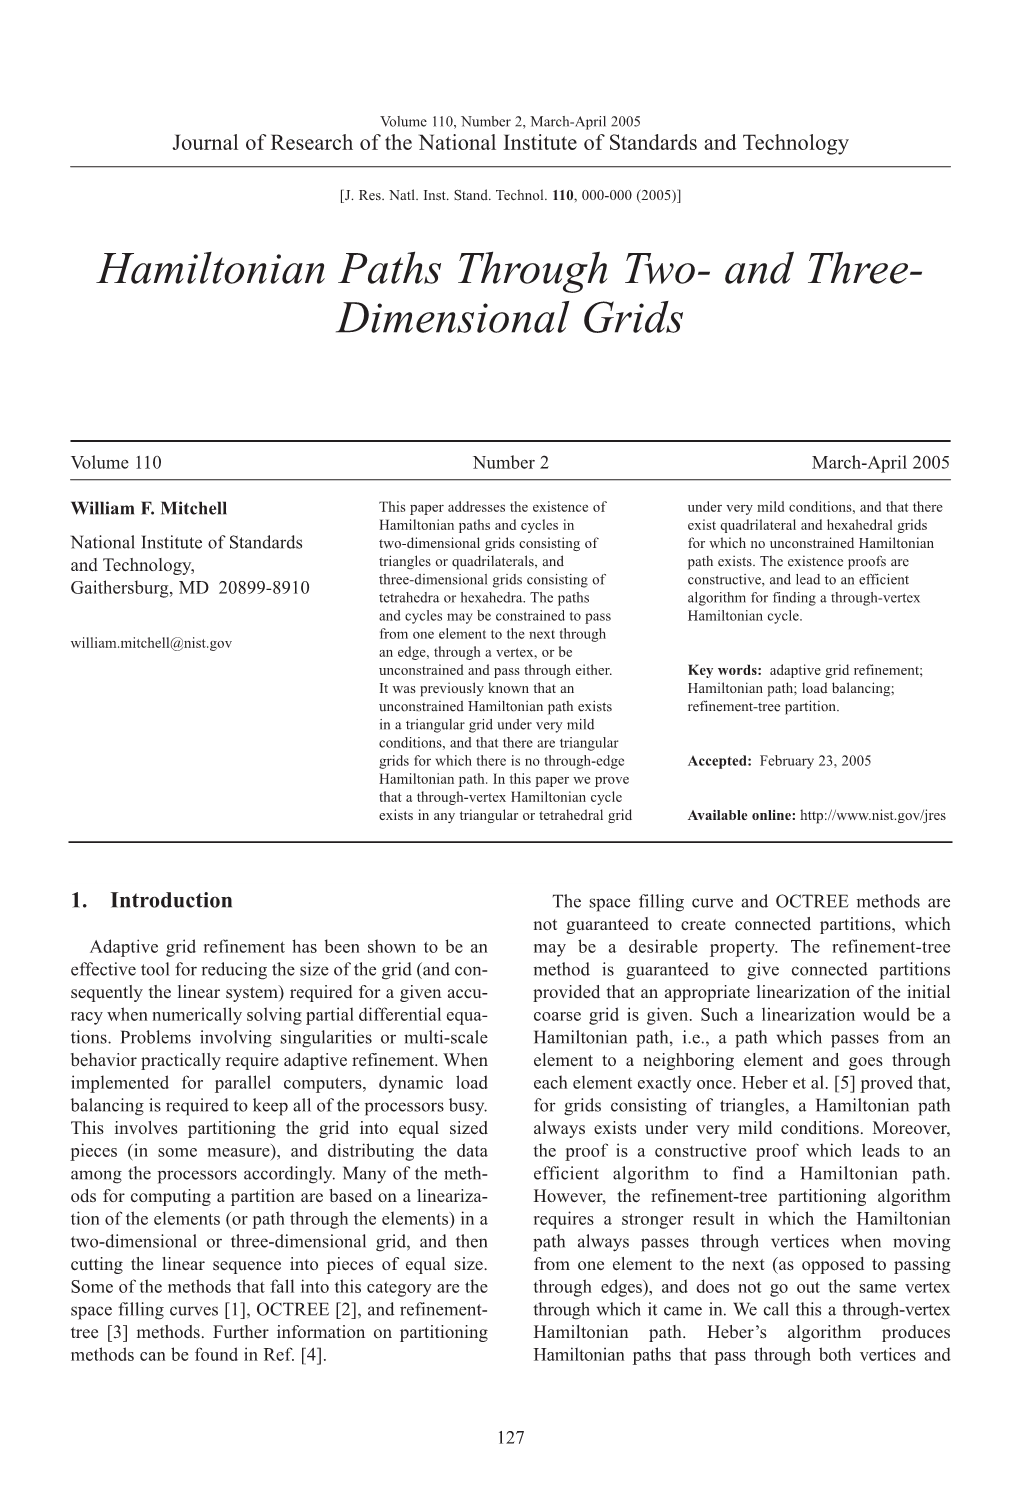 Hamiltonian Paths Through Two- and Three- Dimensional Grids